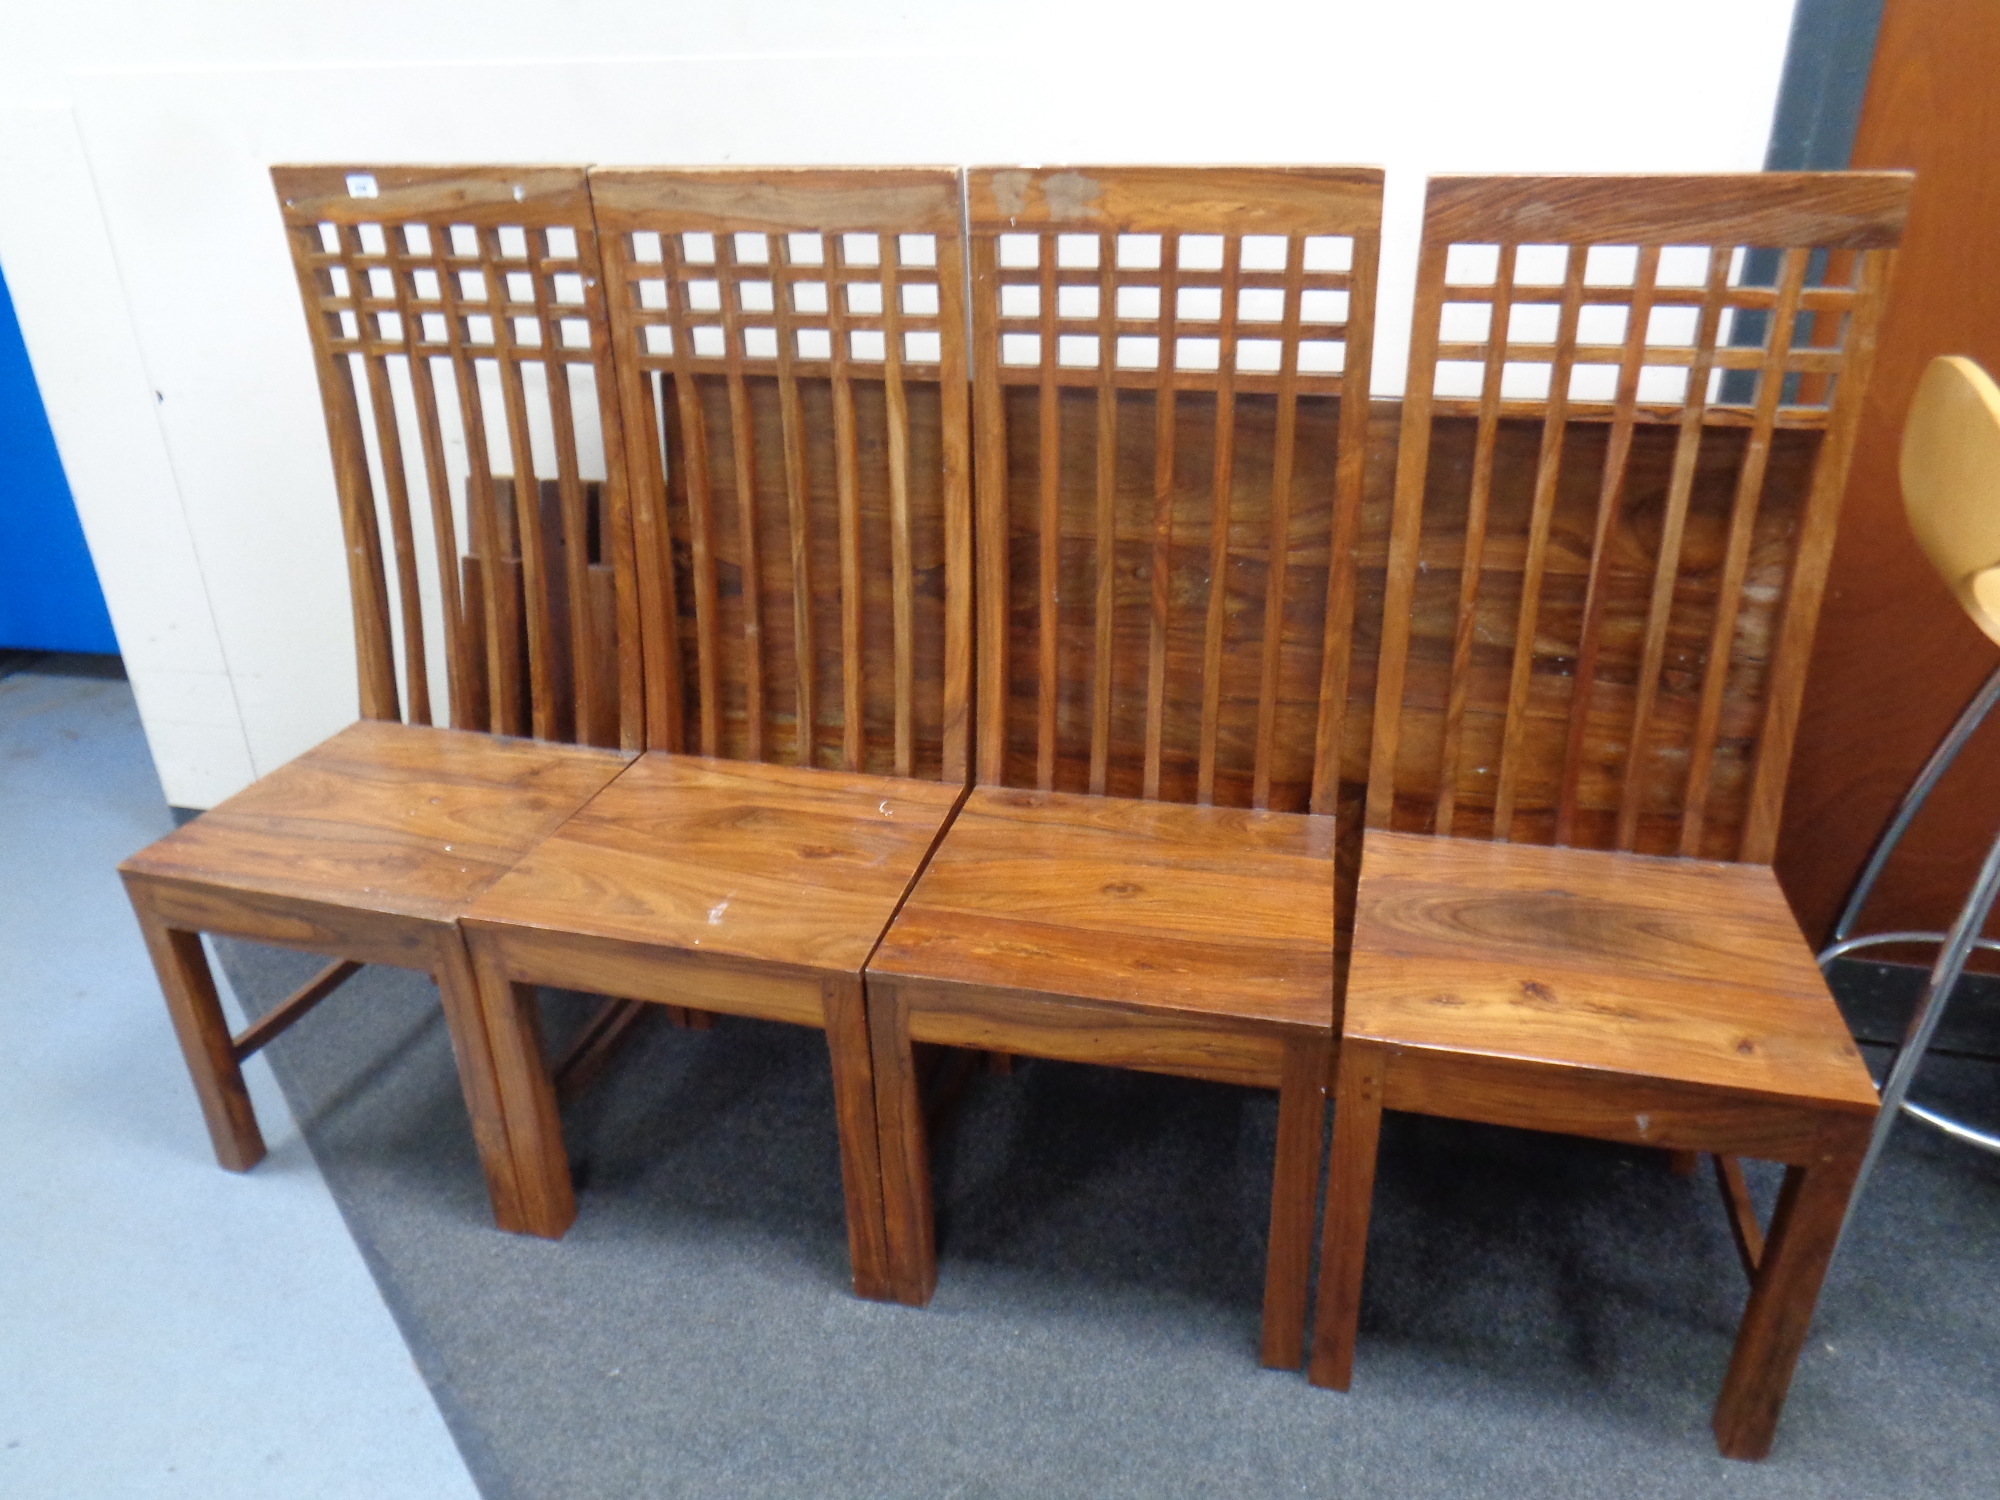 A sheesham wood dining table together with a set of four high back chairs